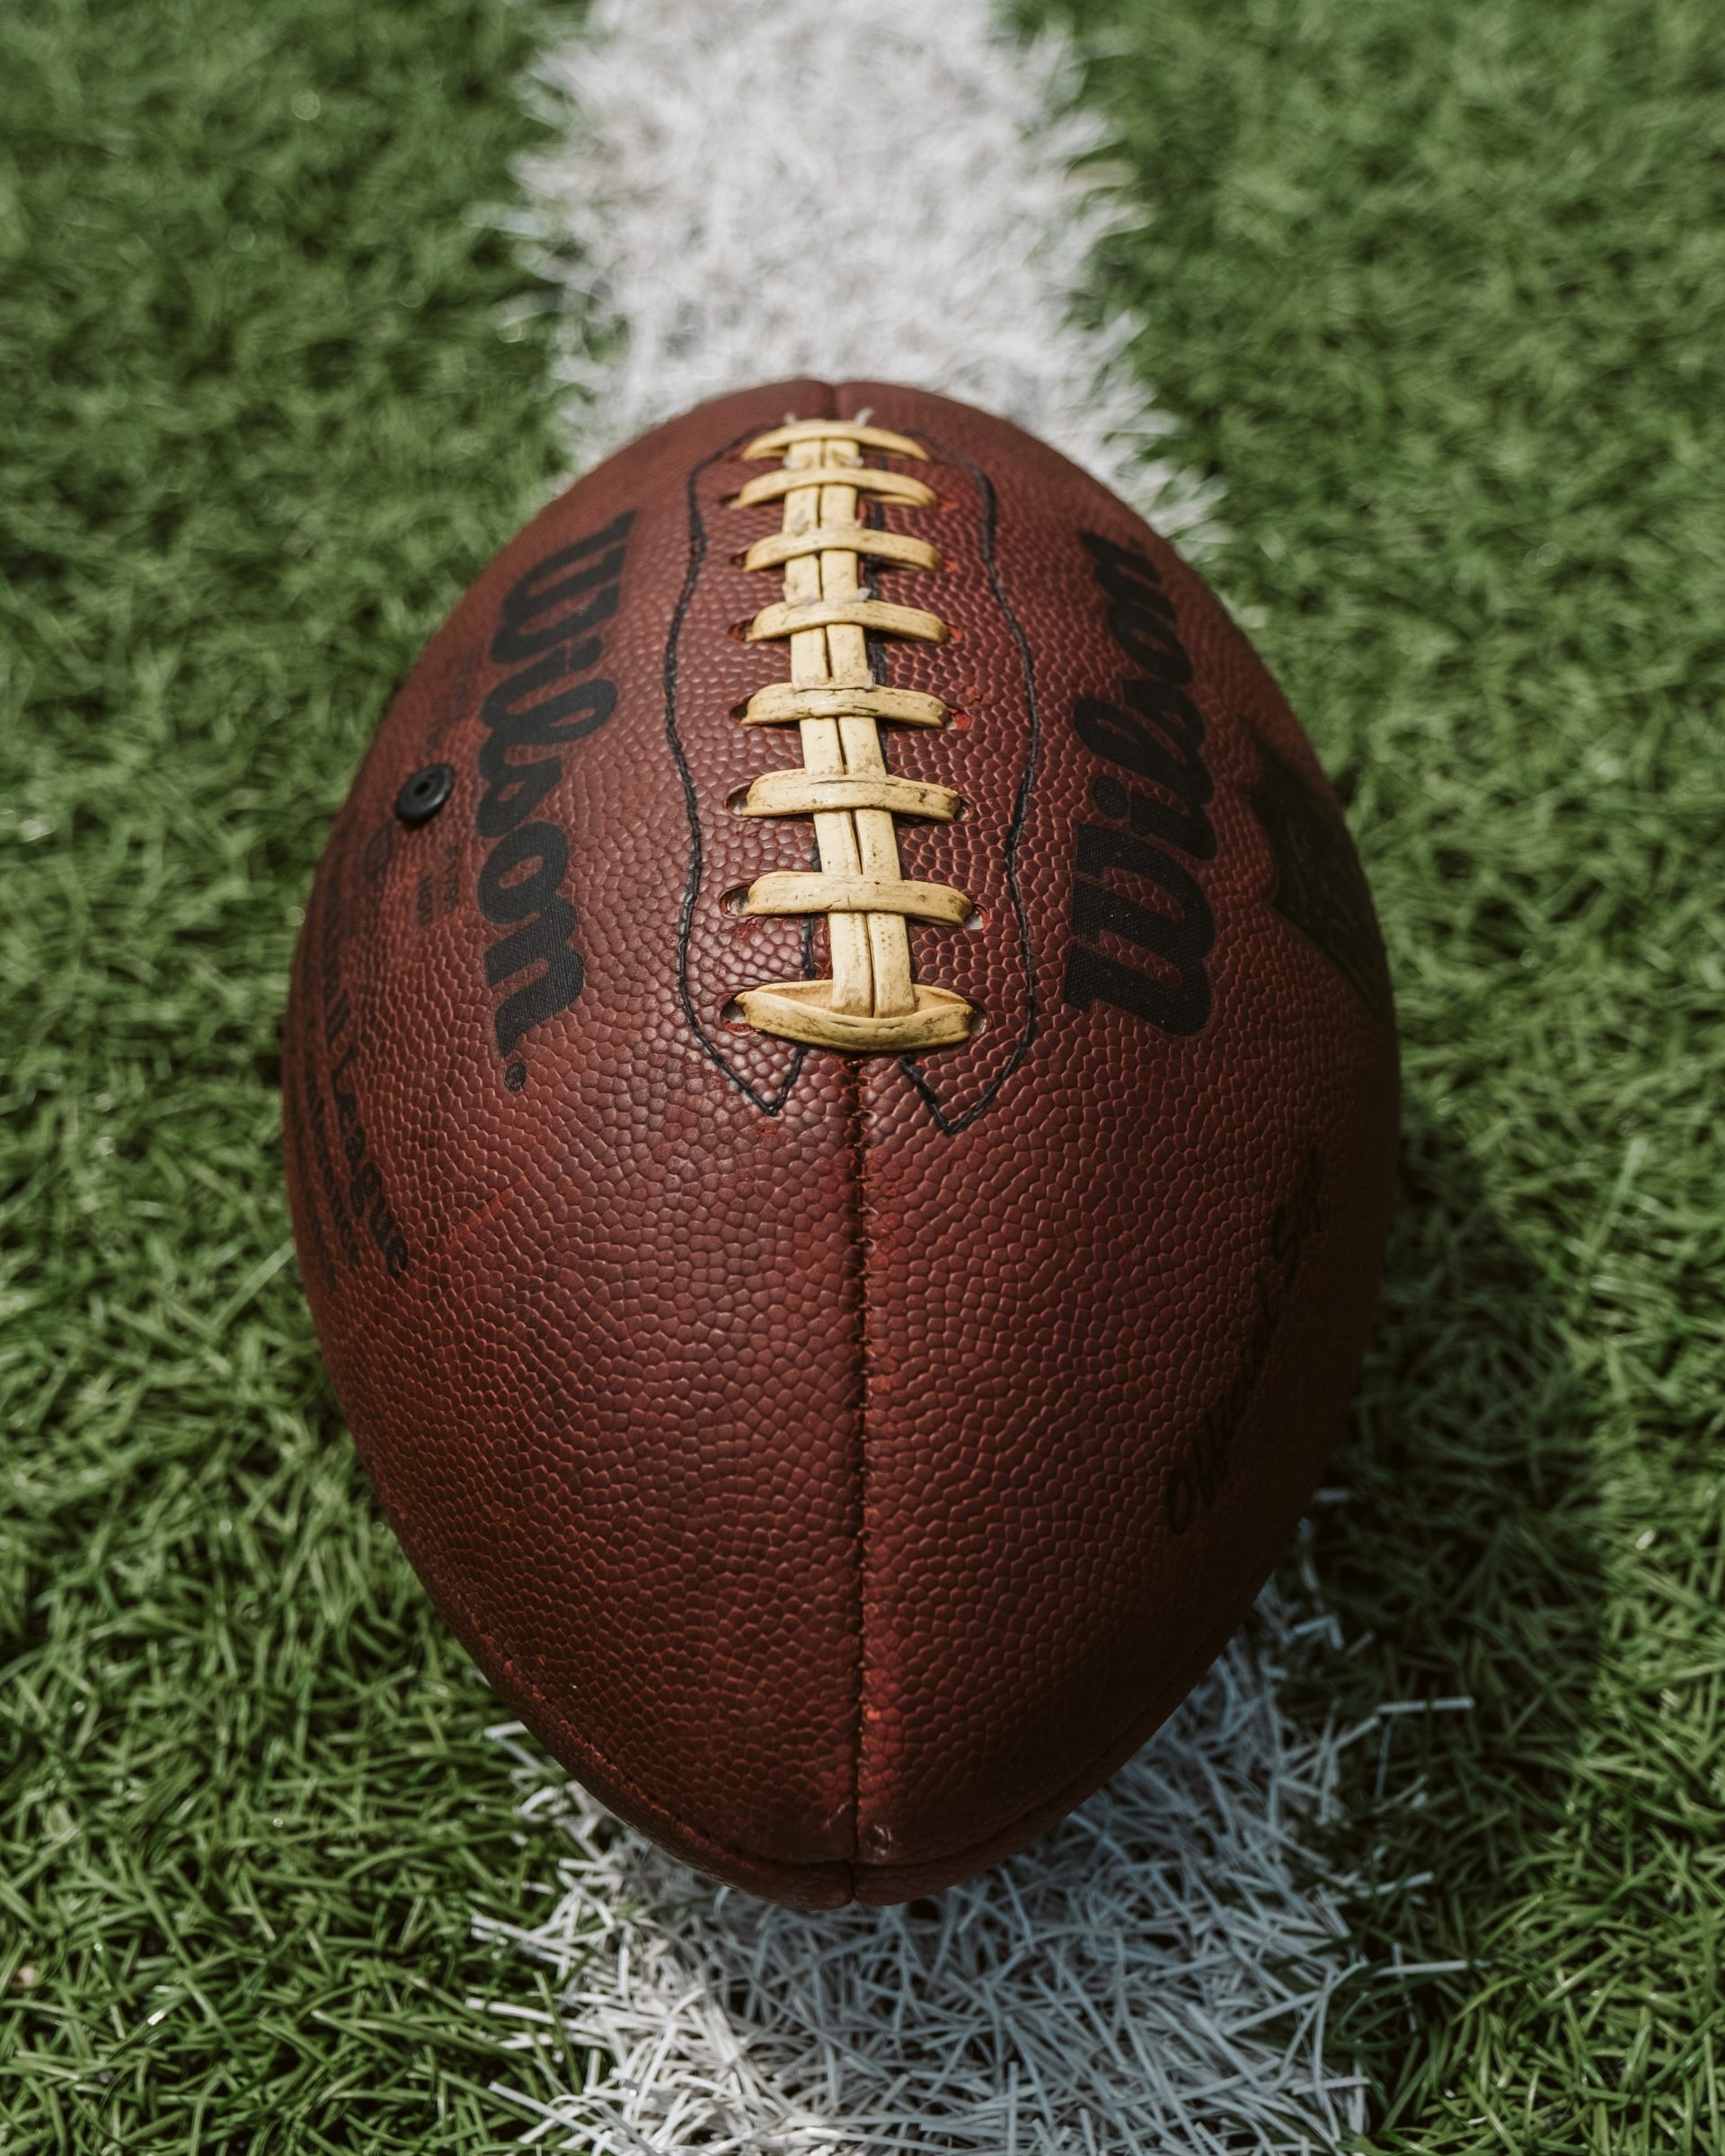 1920x2400 Best NFL IOS 16 Wallpapers For IPhone (Depth Effect And More) | TechBriefly